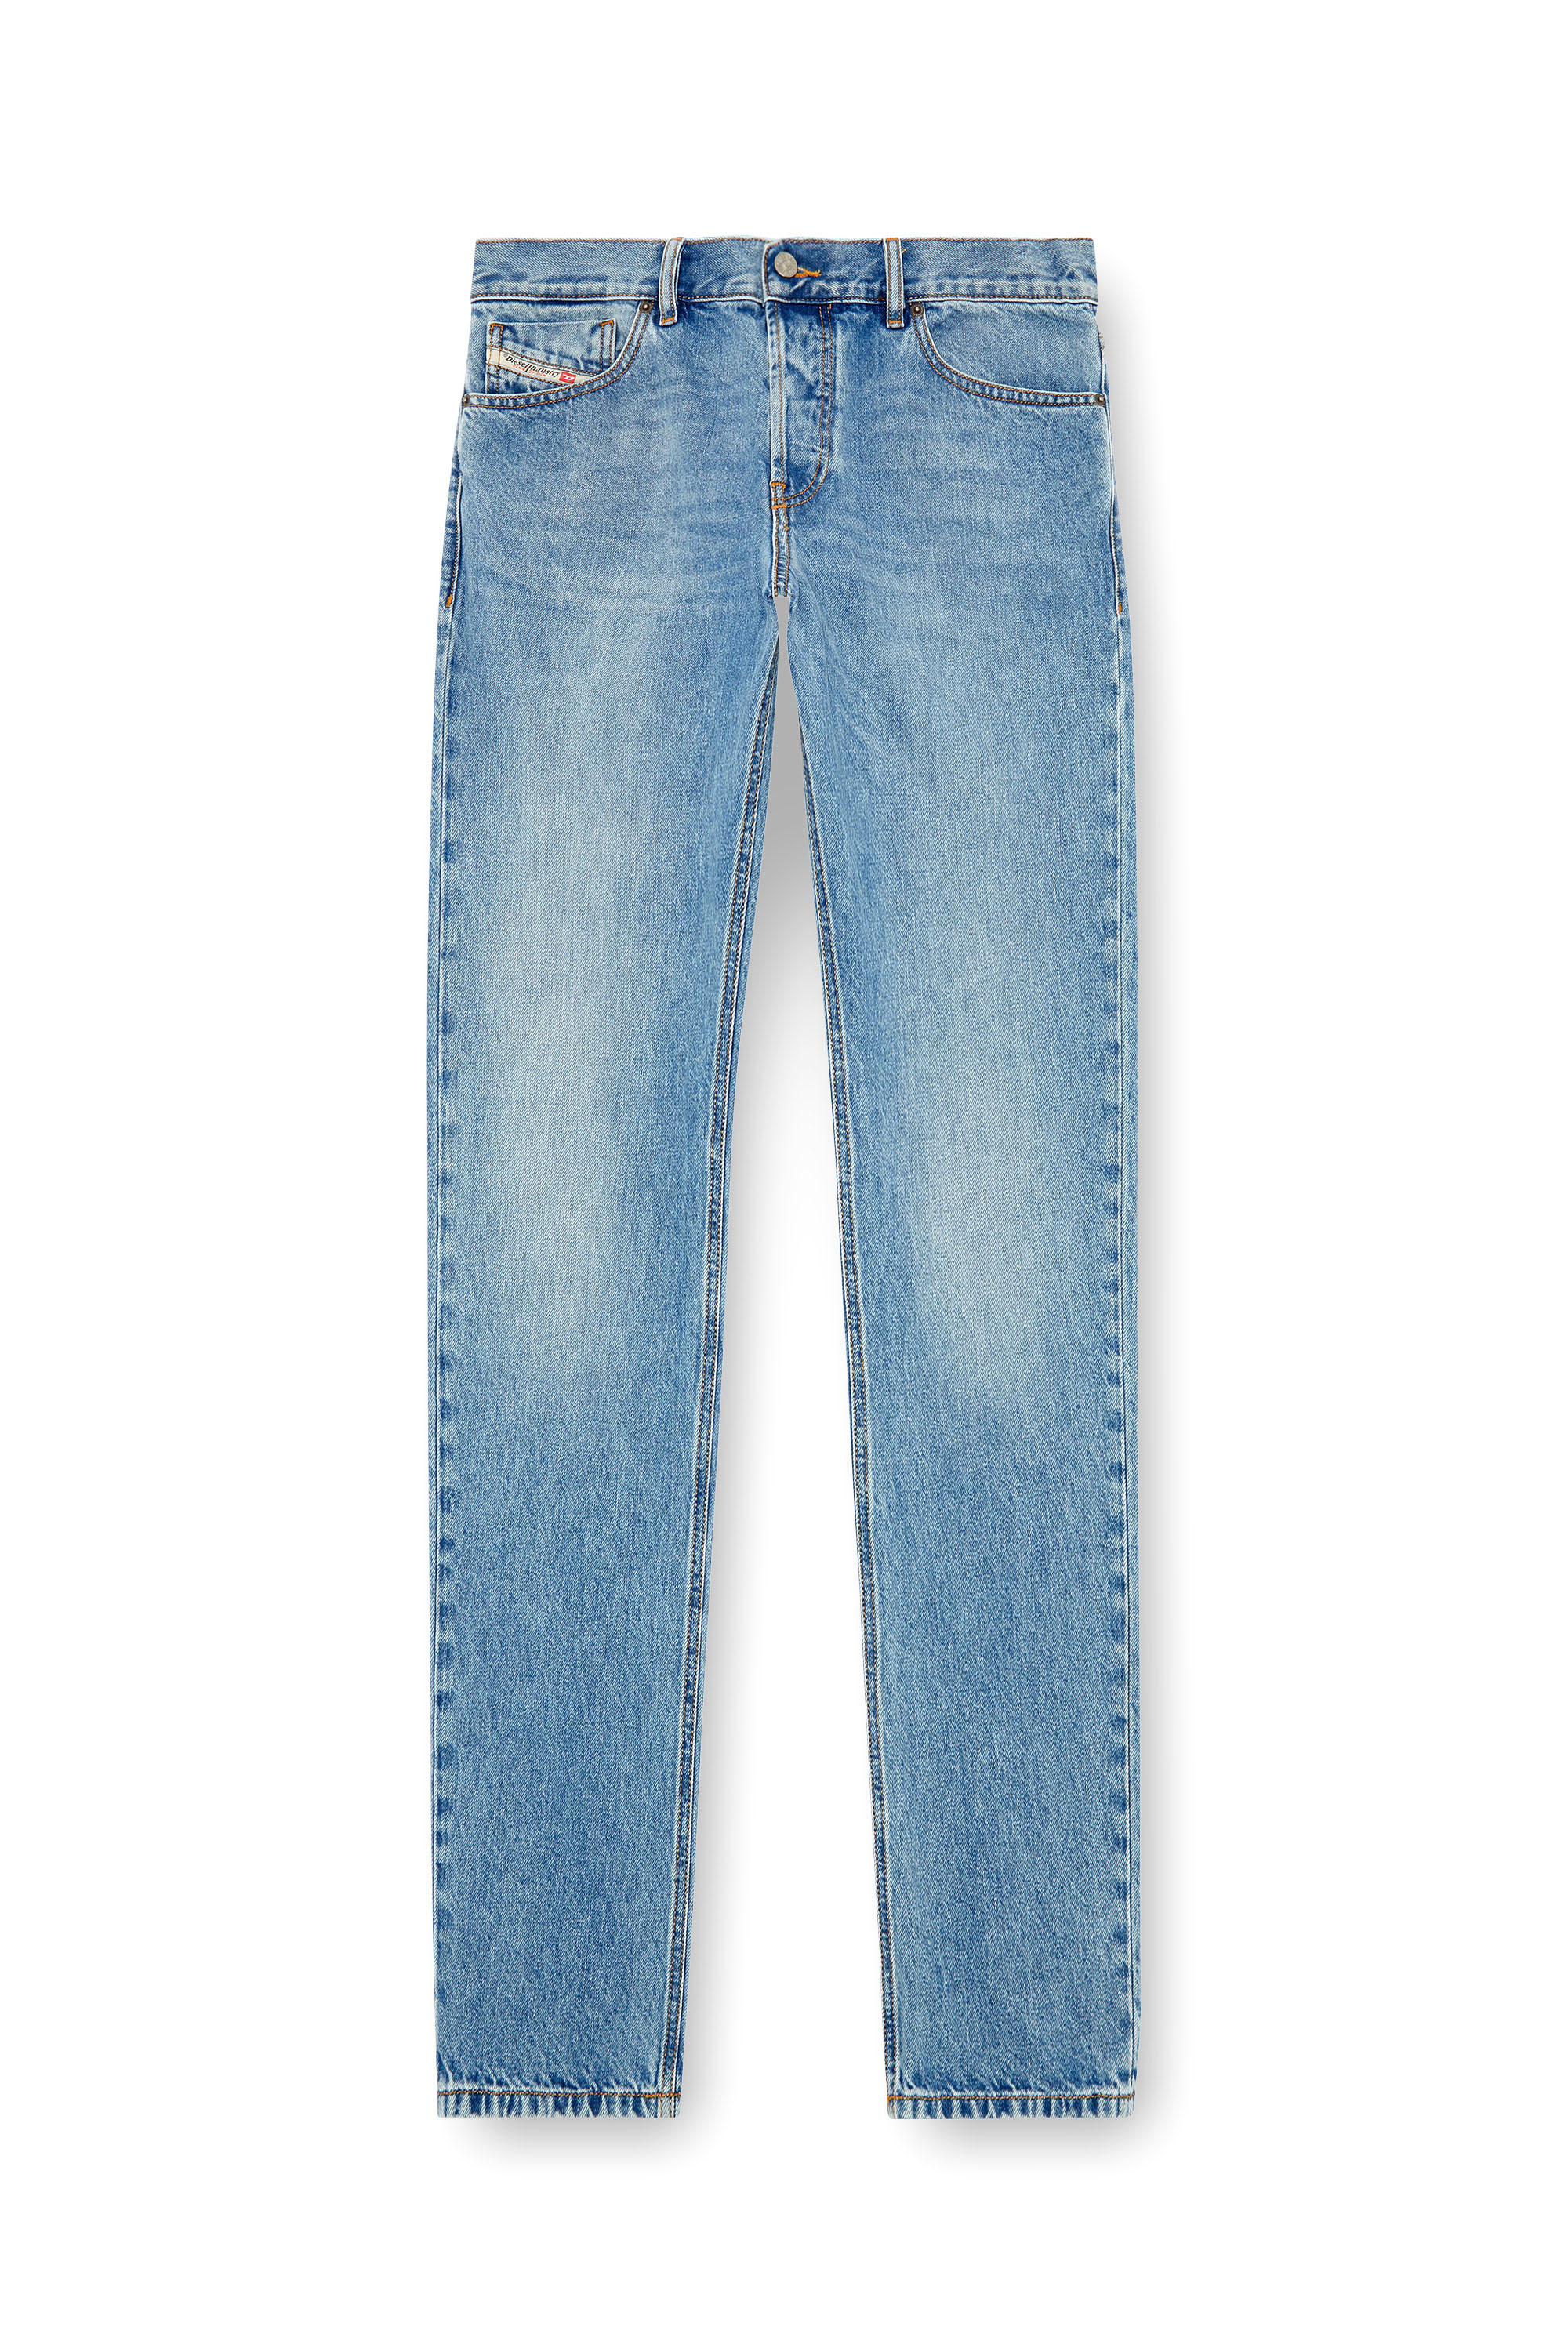 Diesel - Straight Jeans 1995 D-Sark 09I29, Hombre Straight Jeans - 1995 D-Sark in Azul marino - Image 3